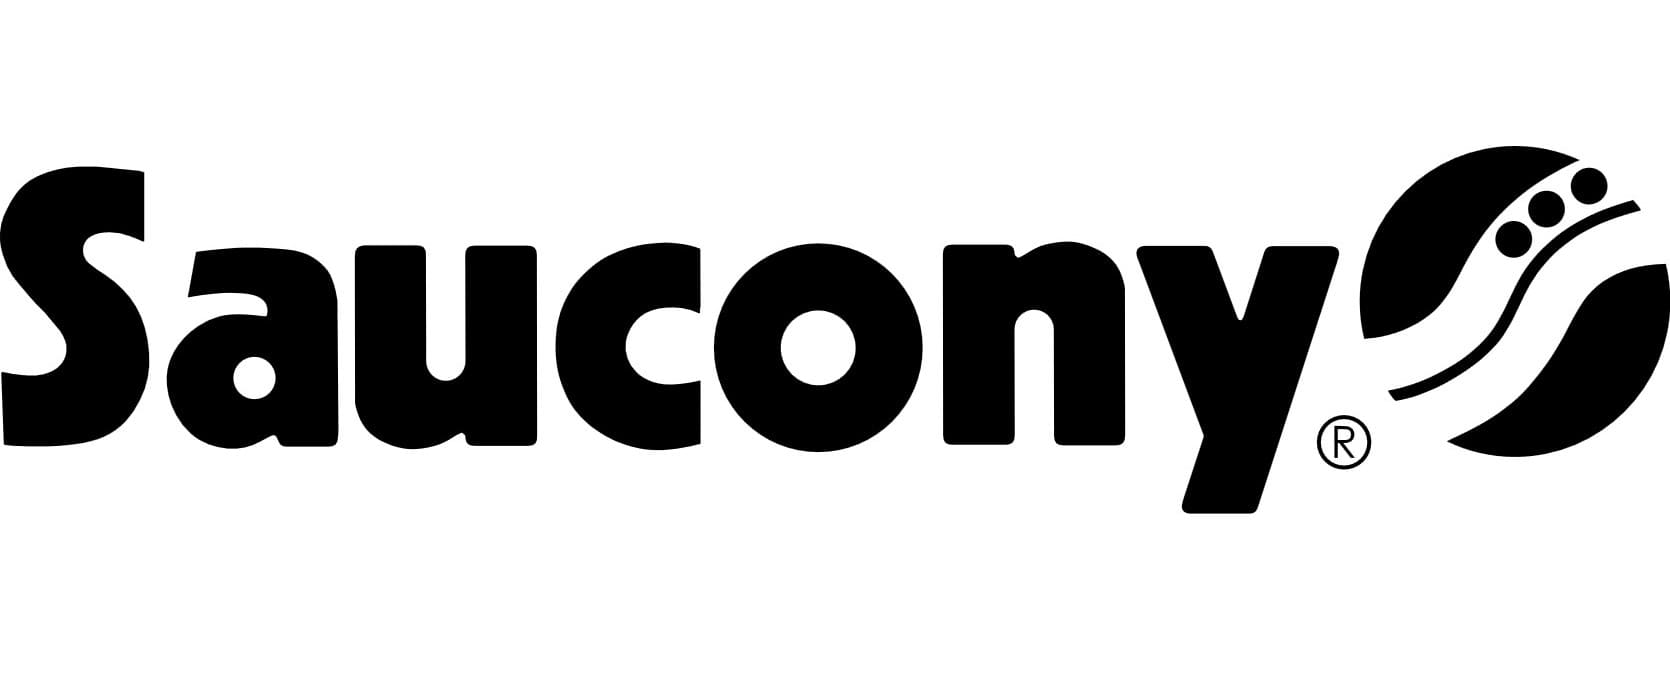 saucony meaning